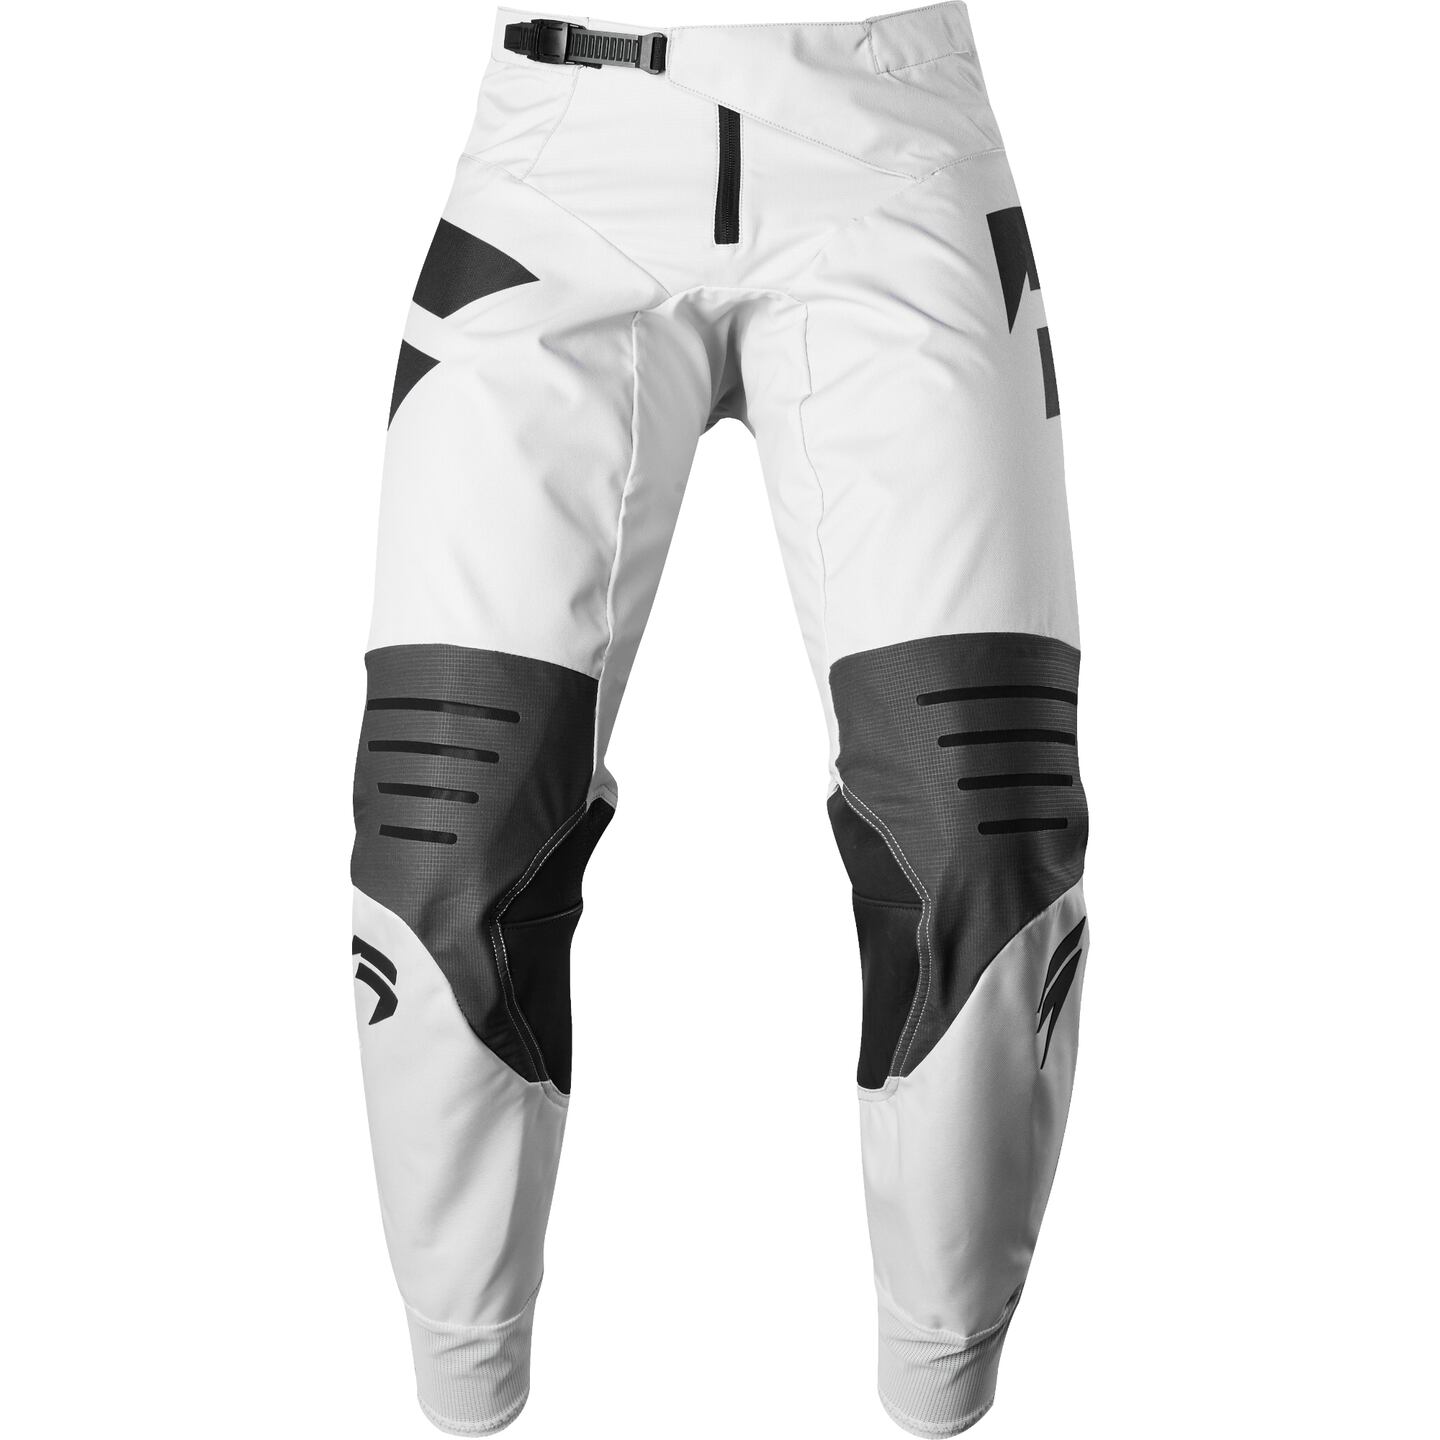 Shift MX Racing Recon Over The Boot Riding Pants Motocross Offroad Trail MX 2017 